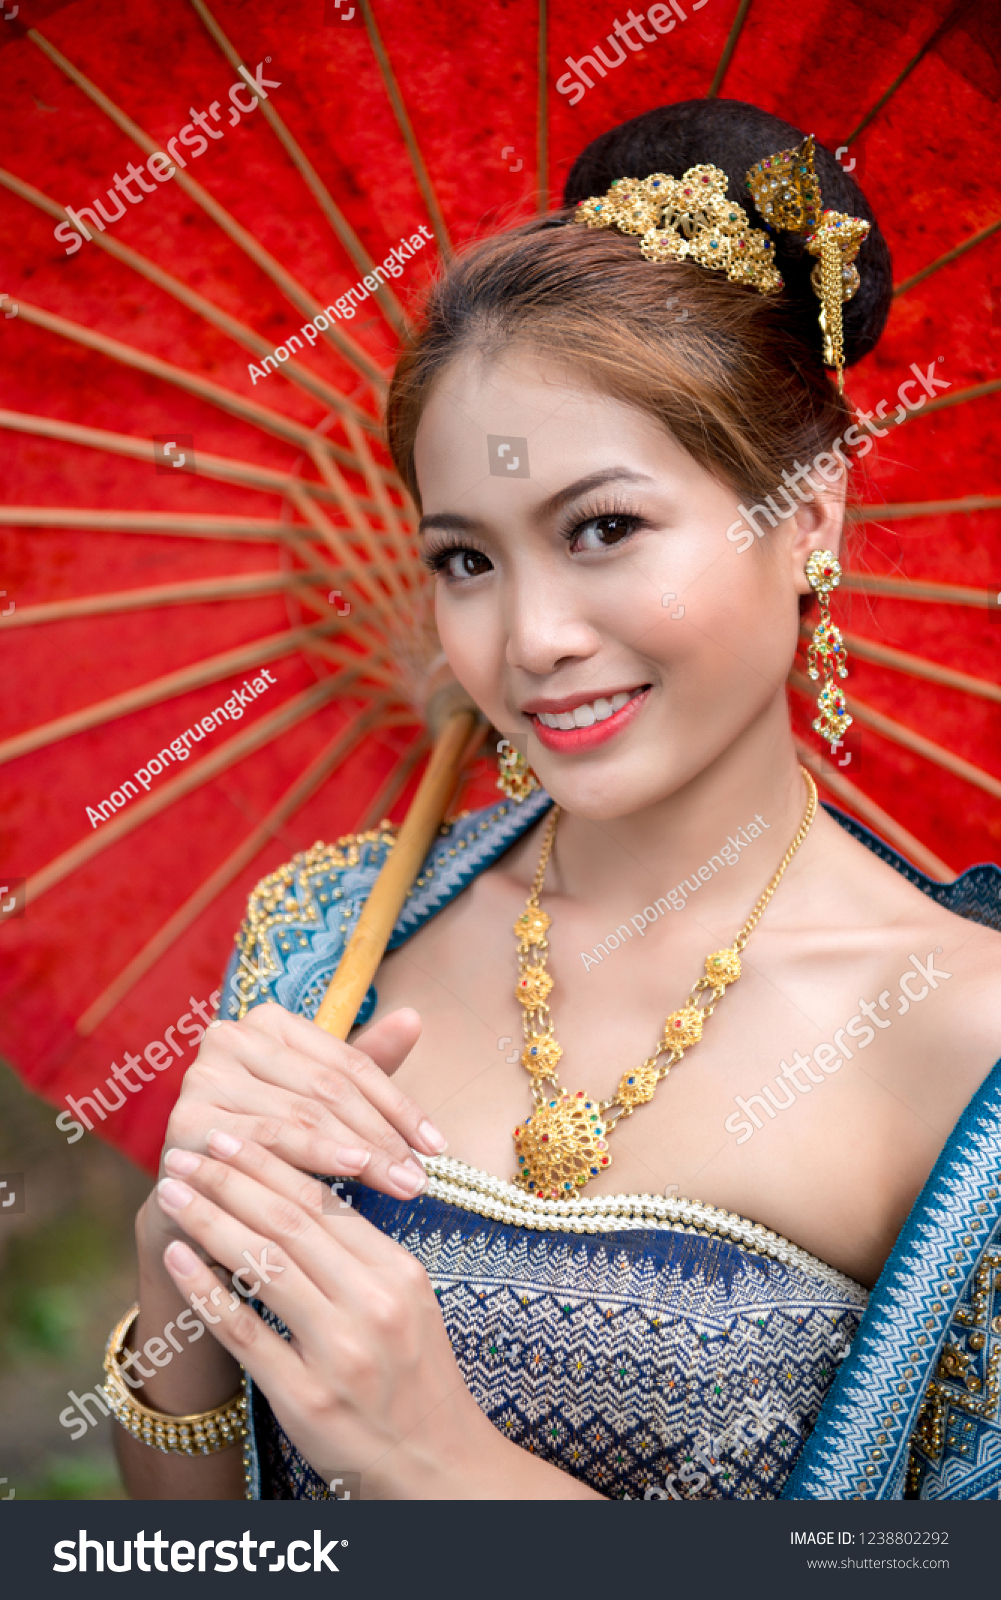 Culture And The Asian Woman